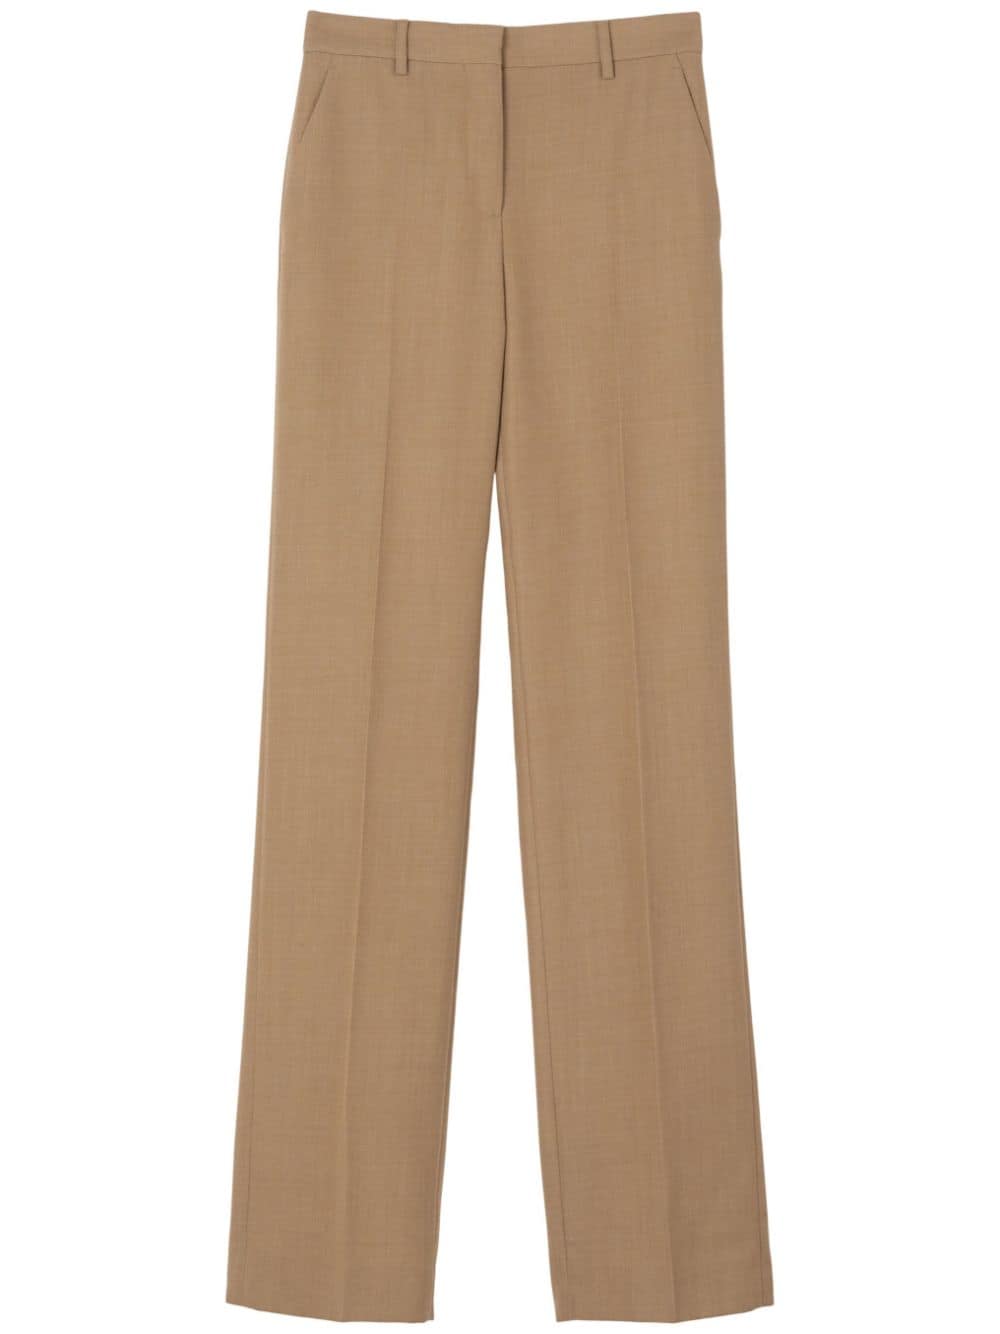 BURBERRY TAILORED STRAIGHT-LEG TROUSERS